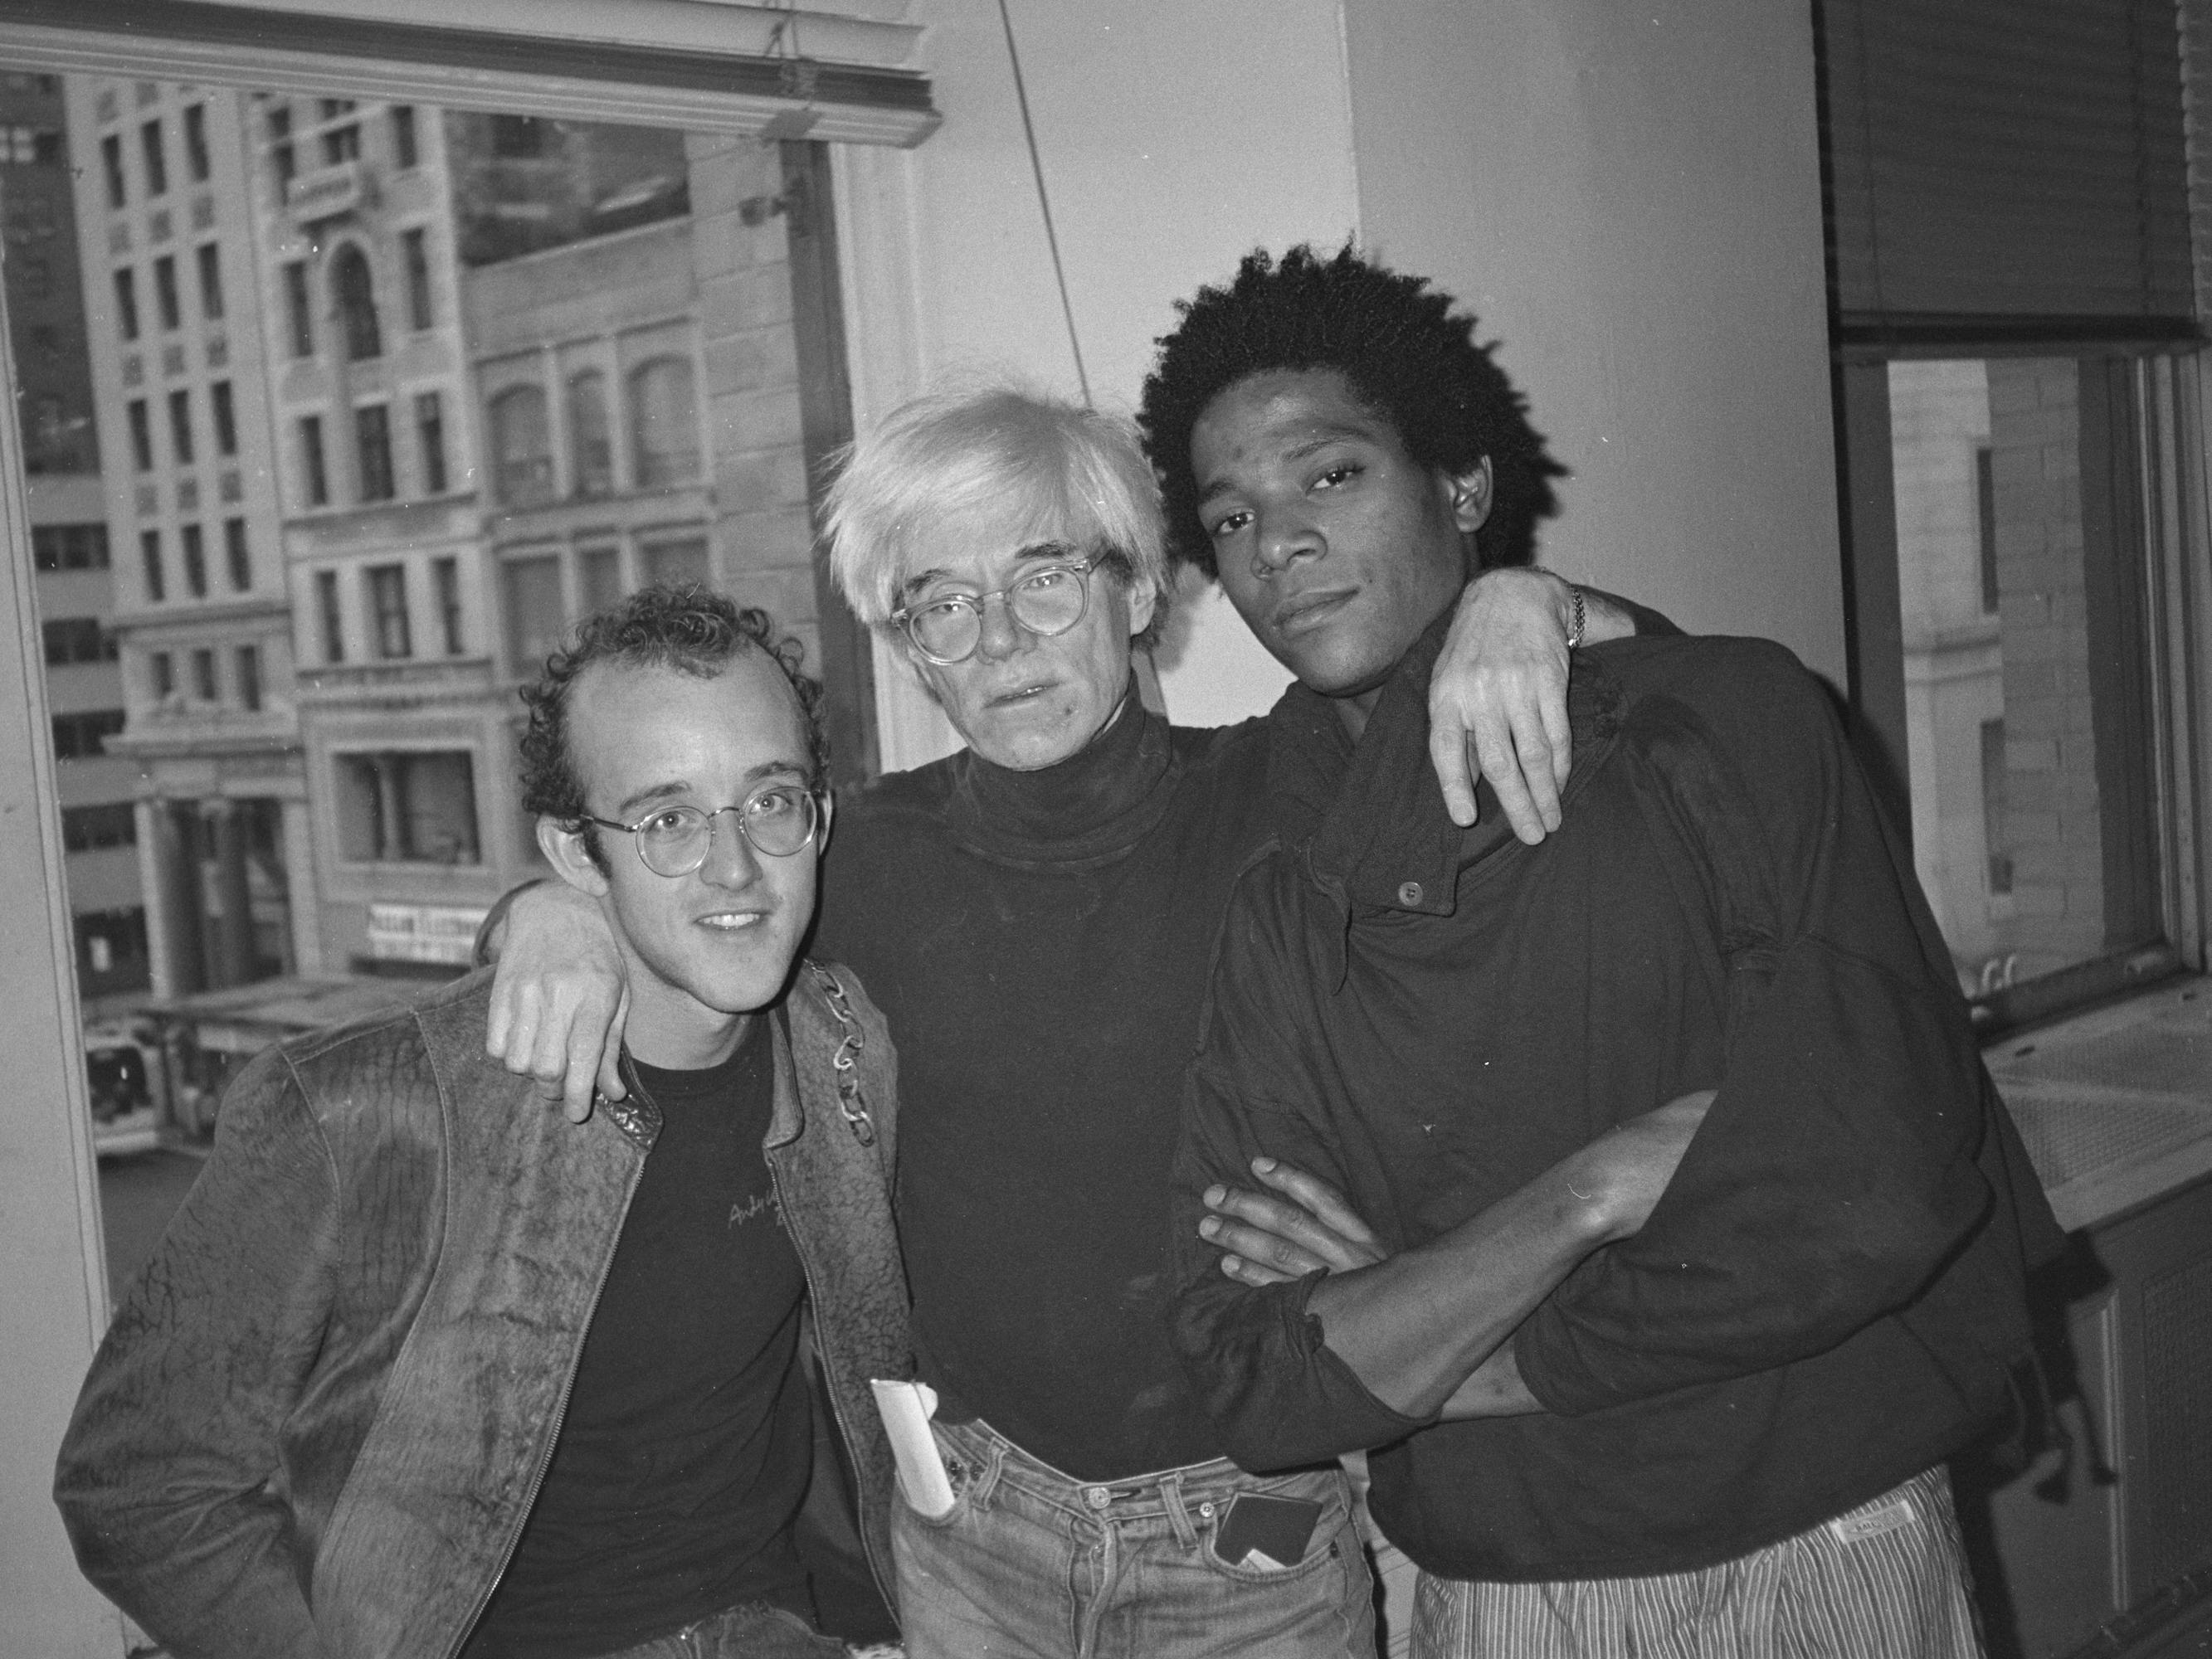 Keith Haring, Andy Warhol, and Jean-Michel Basquiat stand together by a big window. They each wear black tops.